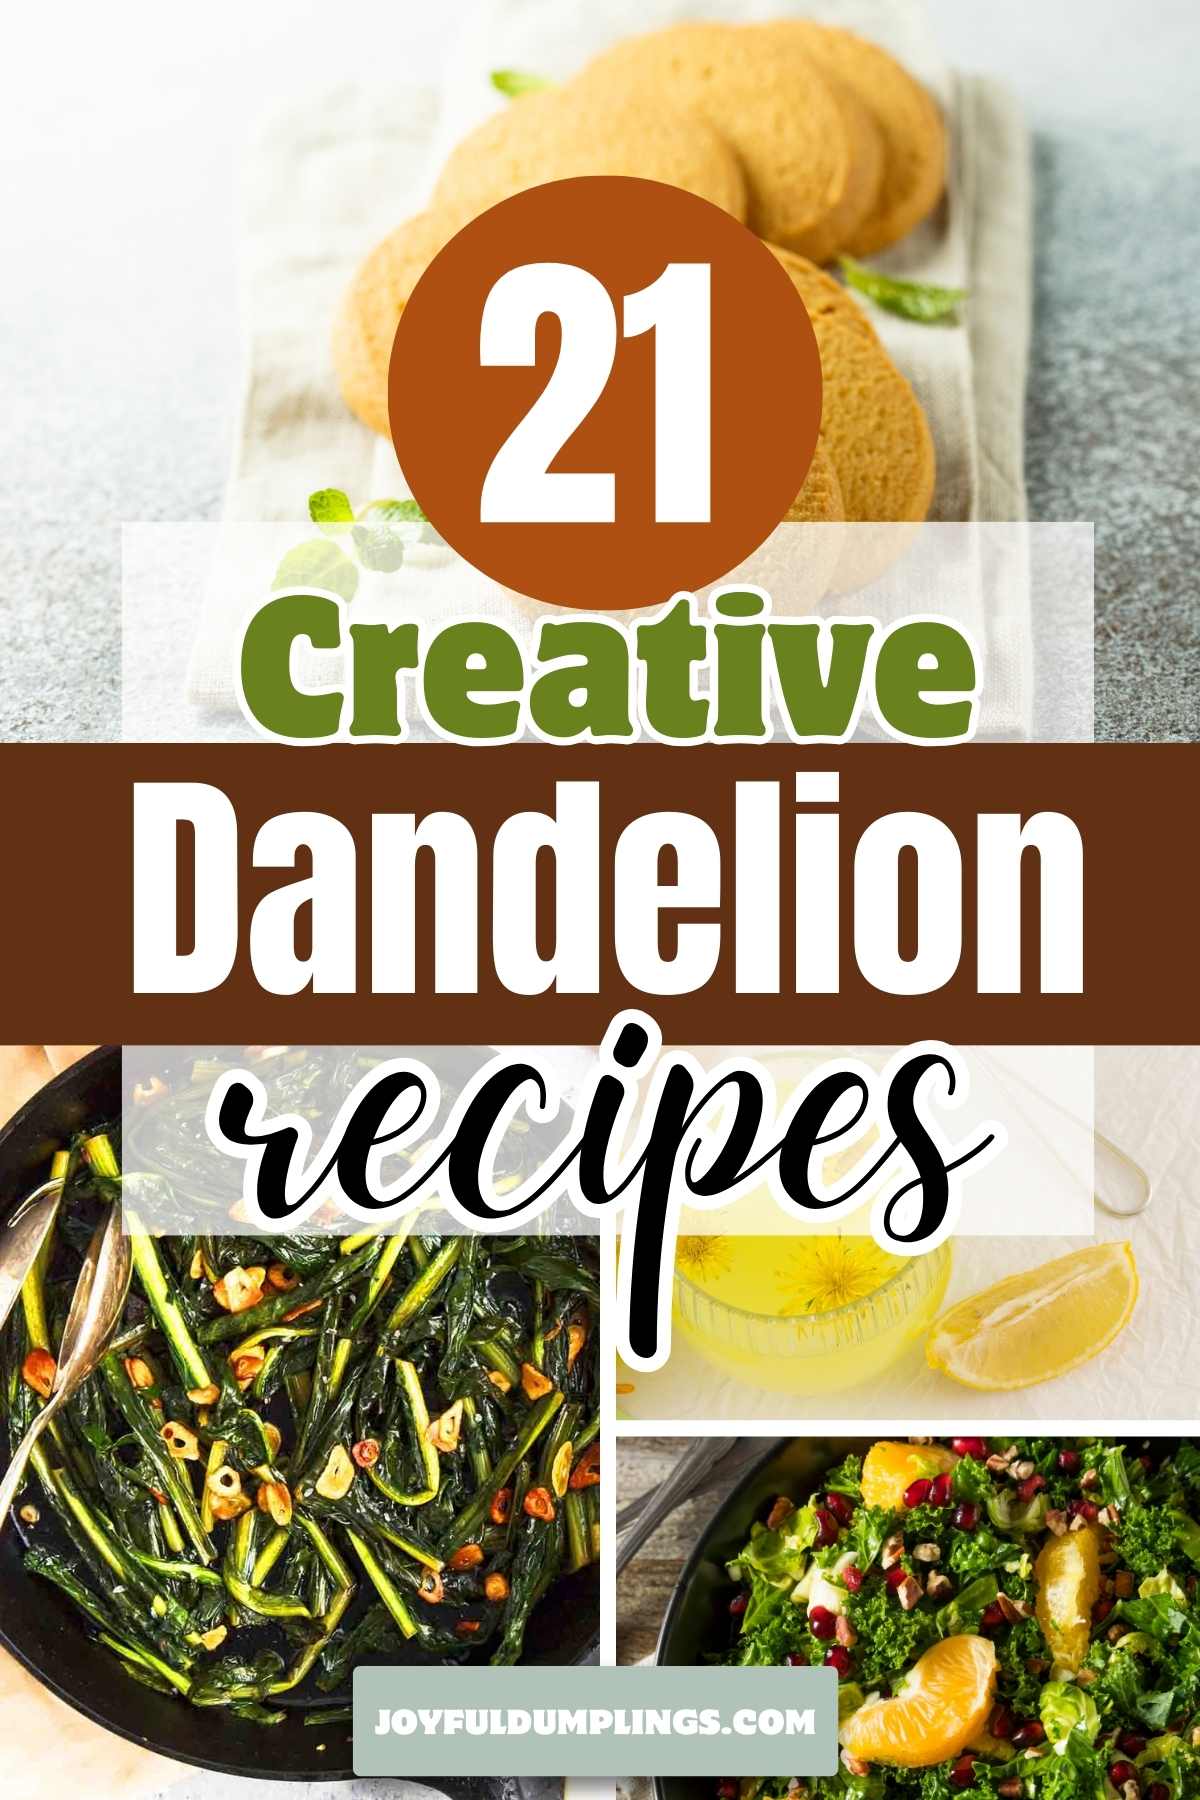 Dandelion Recipes (Flowers, Greens, and Roots)